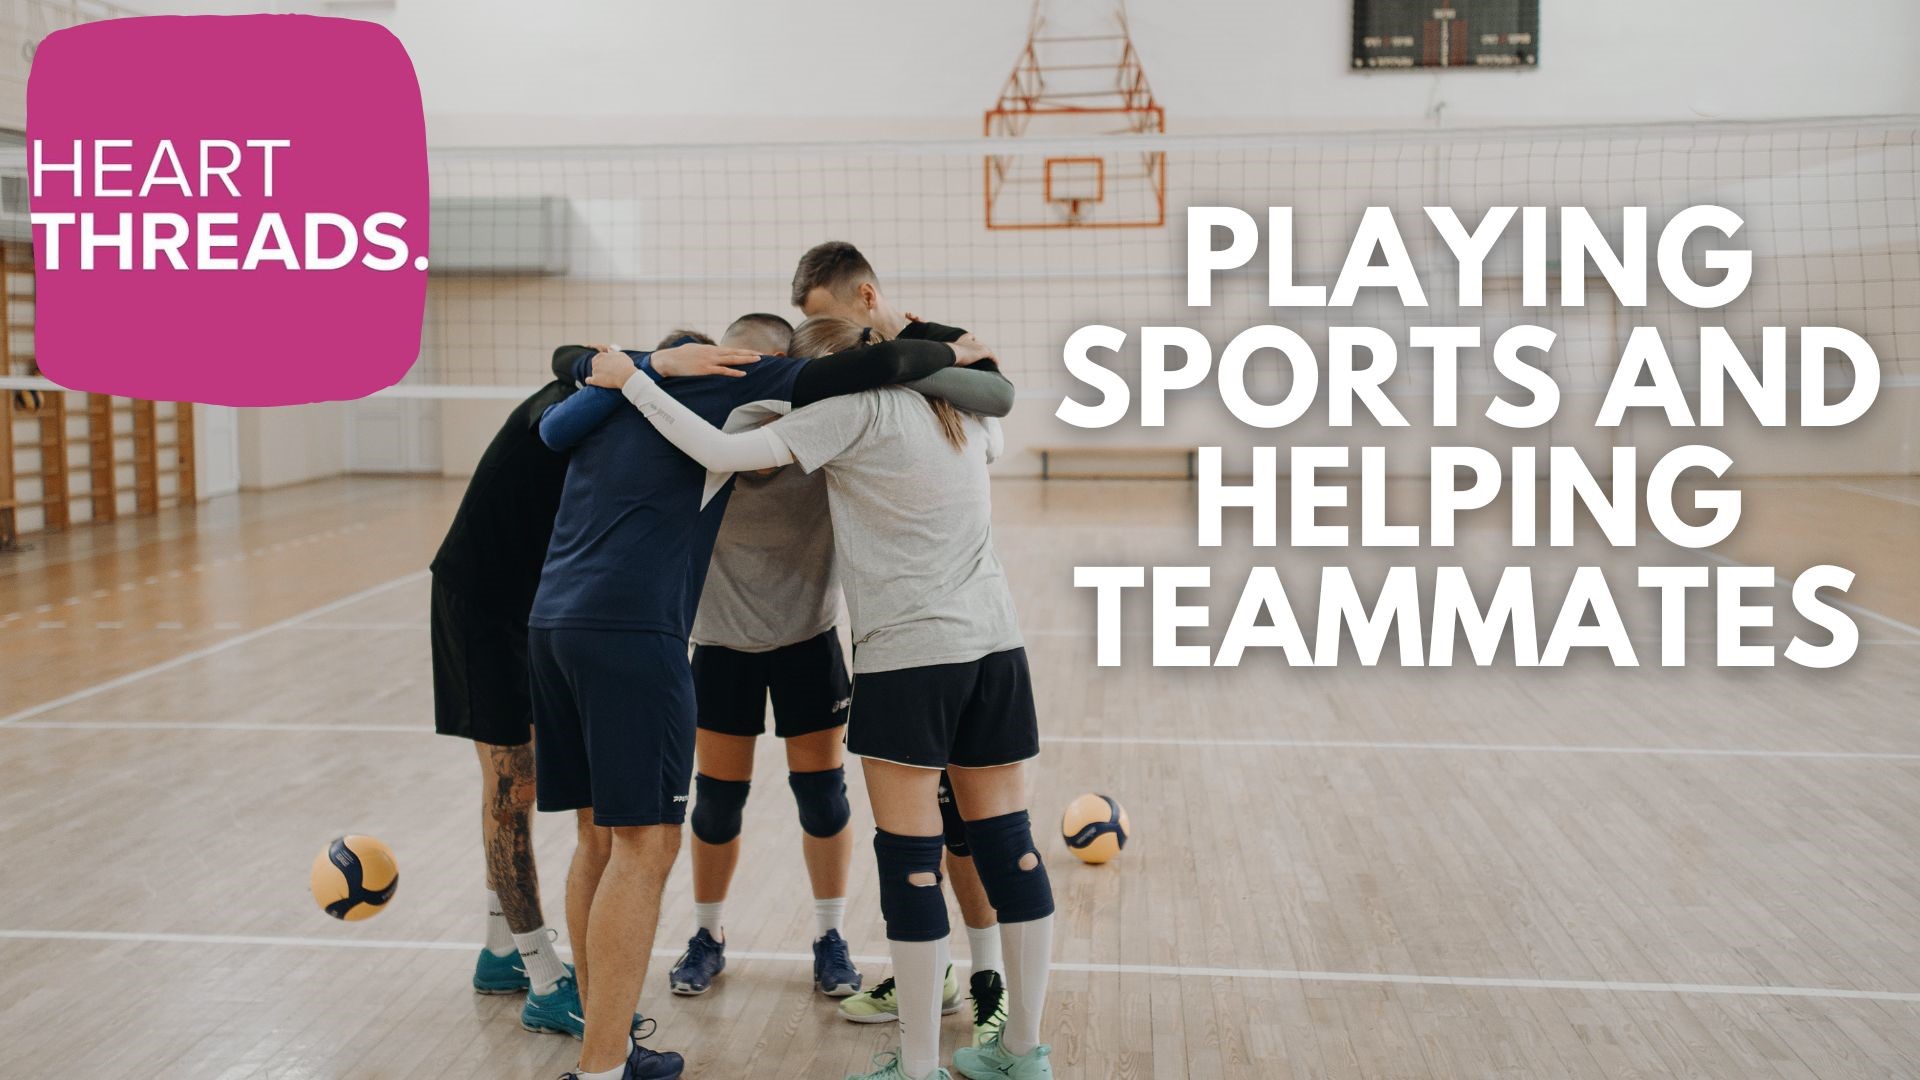 A collection of stories highlighting the power of teamwork and passion for sports. Plus how teammates can come together to help each other and the community.